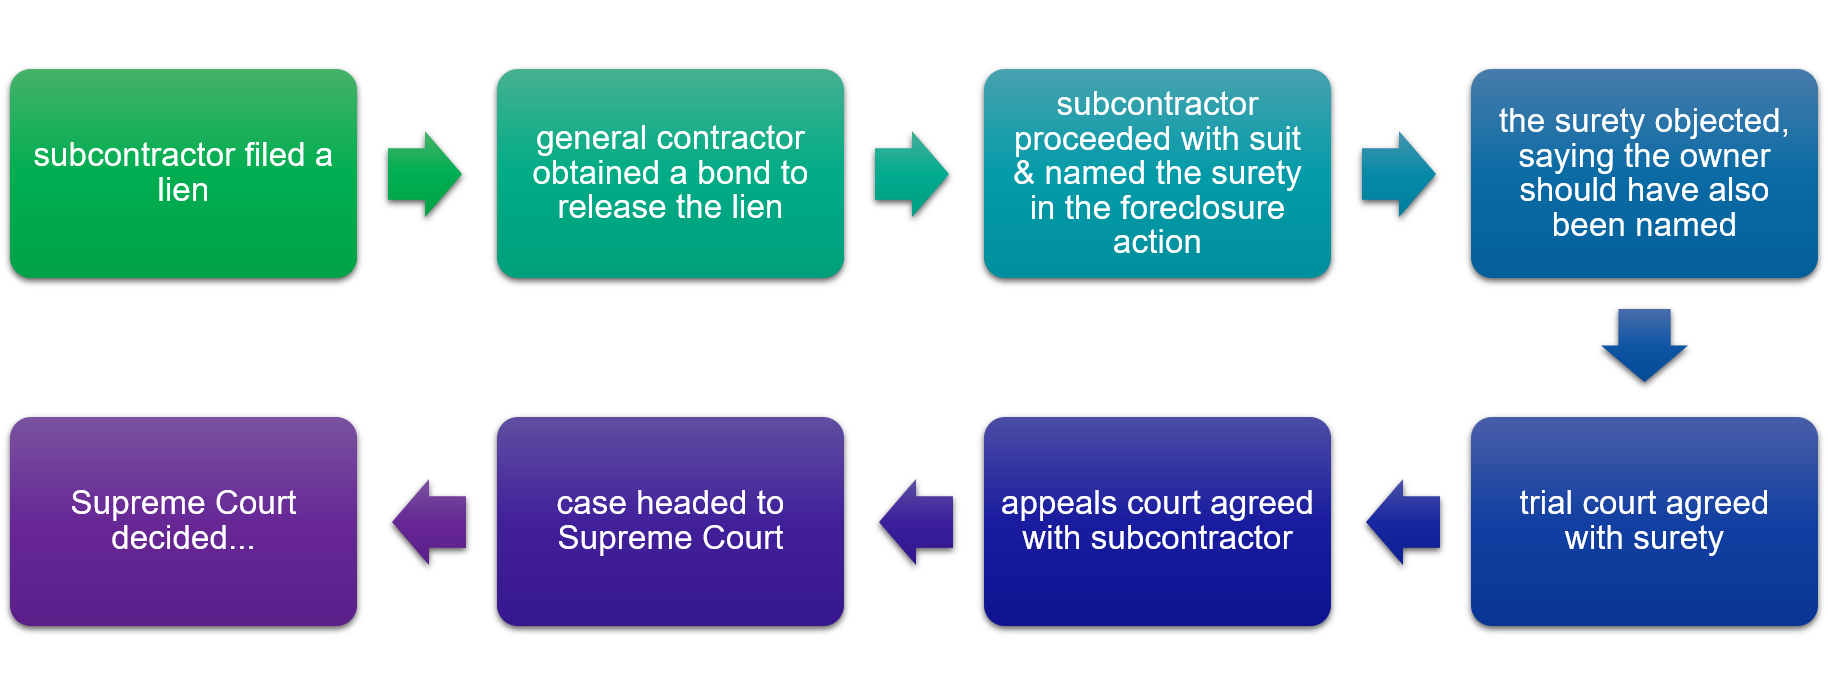 subcontractor filed a lien, general contractor obtained a bond to release the lien, subcontractor proceeded with suit & named the surety in the foreclosure action, the surety objected, saying the owner should have also been named, trial court agreed with surety, appeals court agreed with sub, case went to supreme court, supreme court decided...